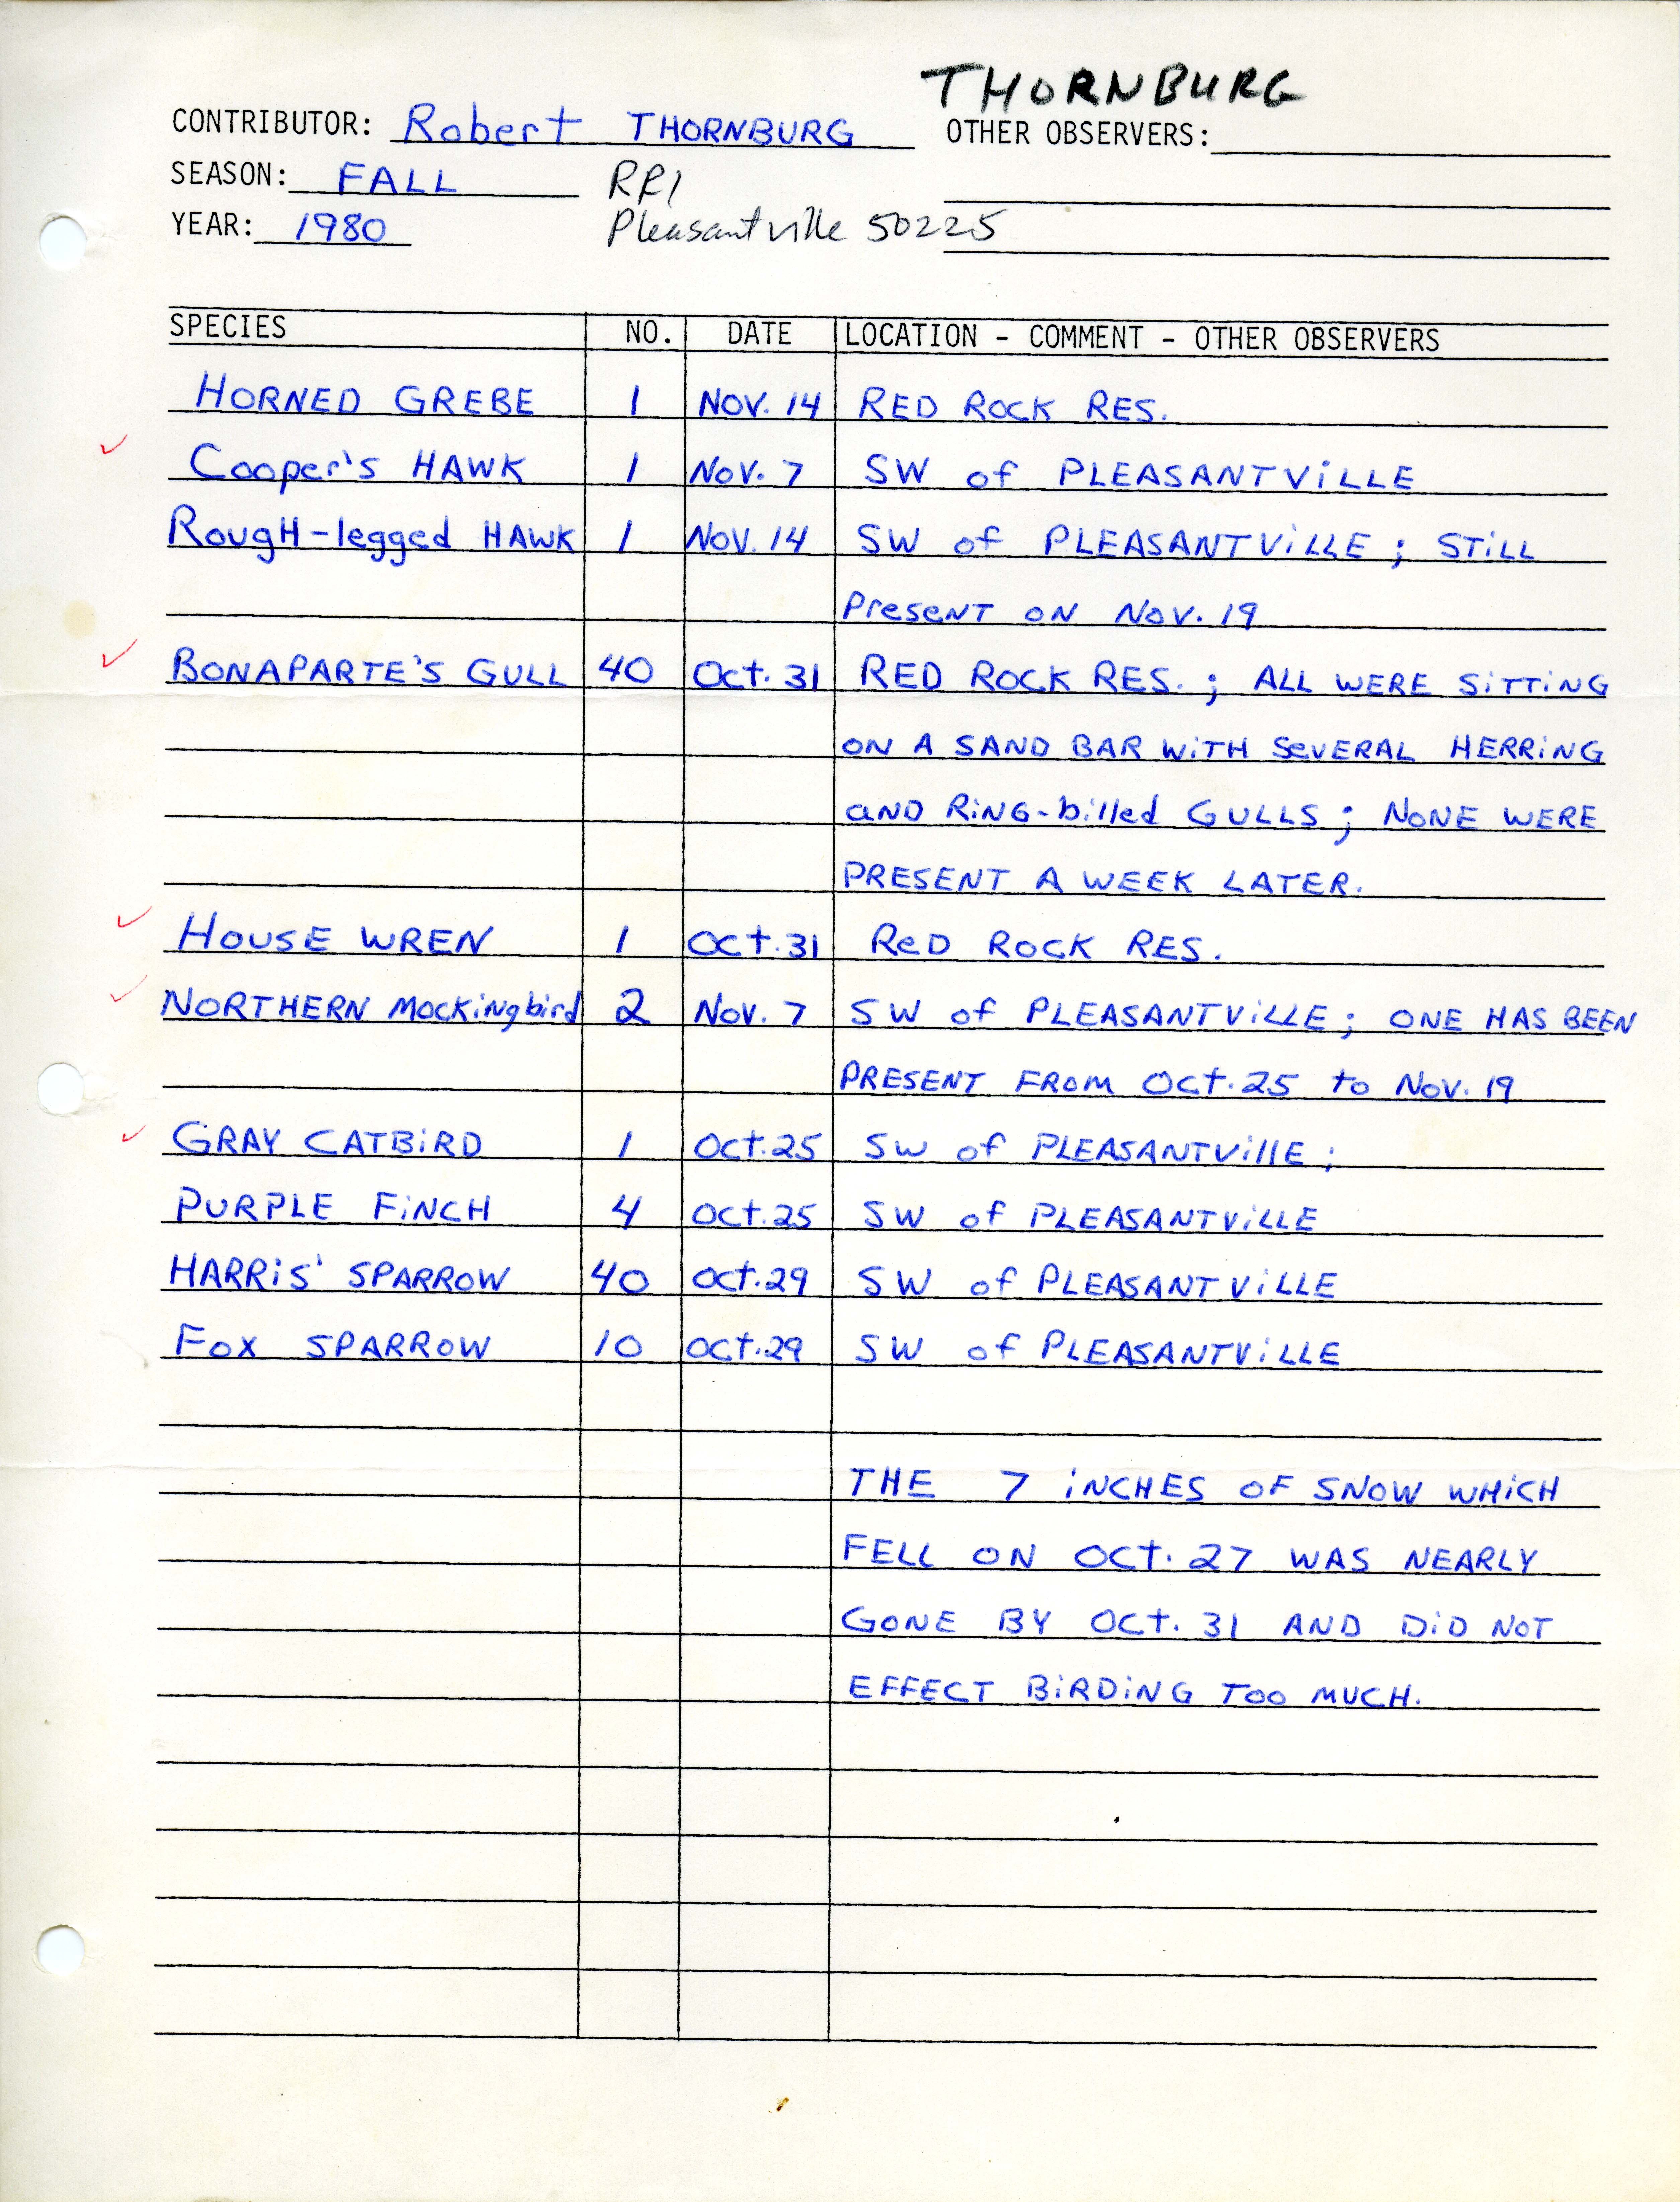 Annotated bird sighting list for Fall 1980 compiled by Robert Thornburg